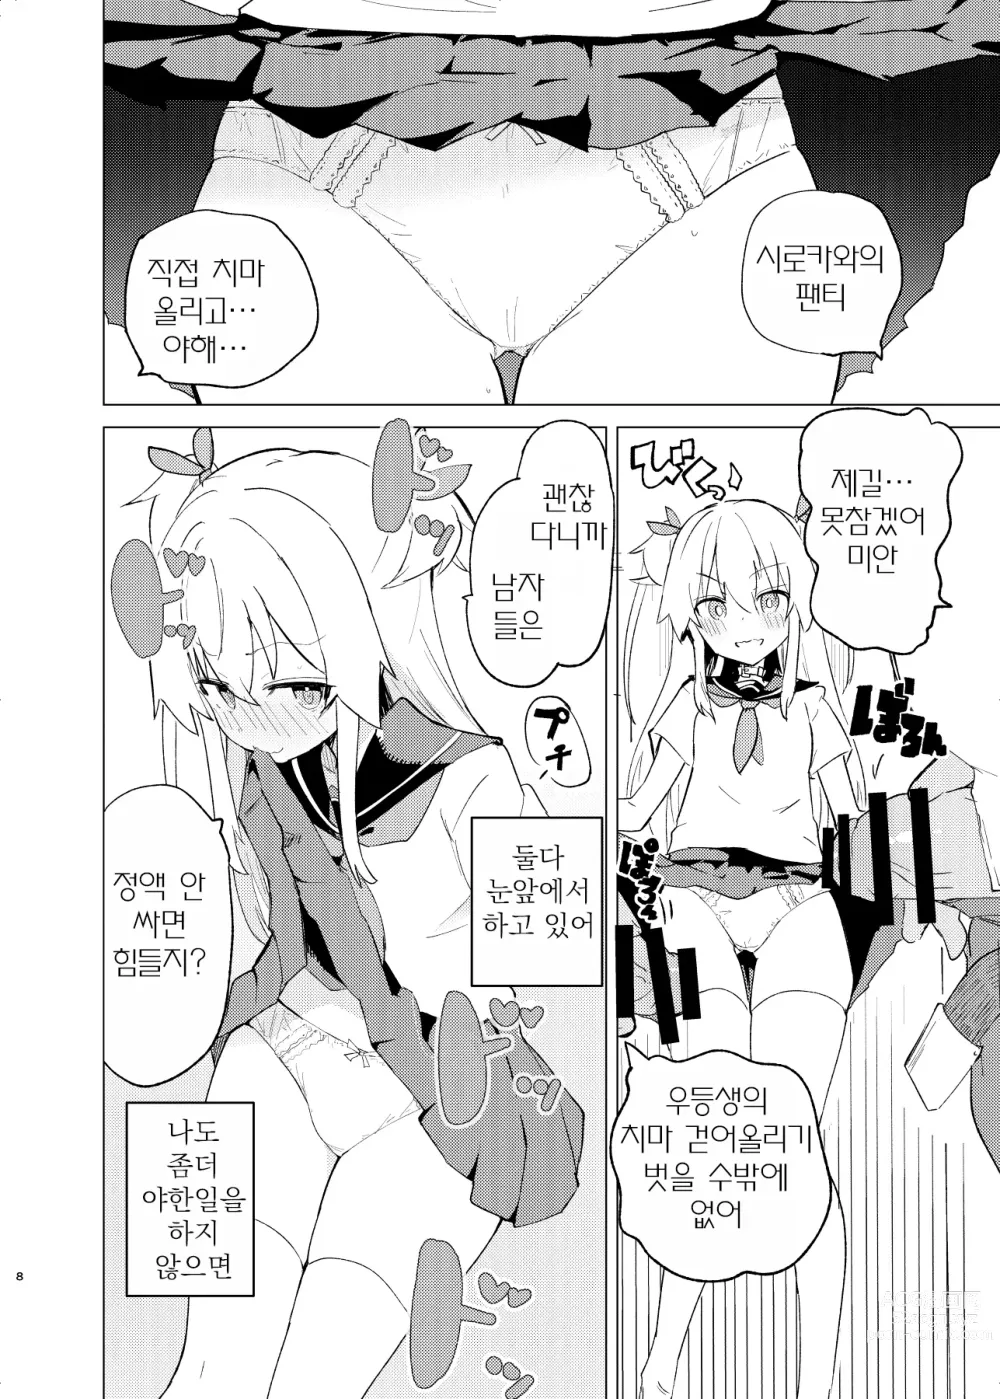 Page 7 of doujinshi S.S.S.DI2